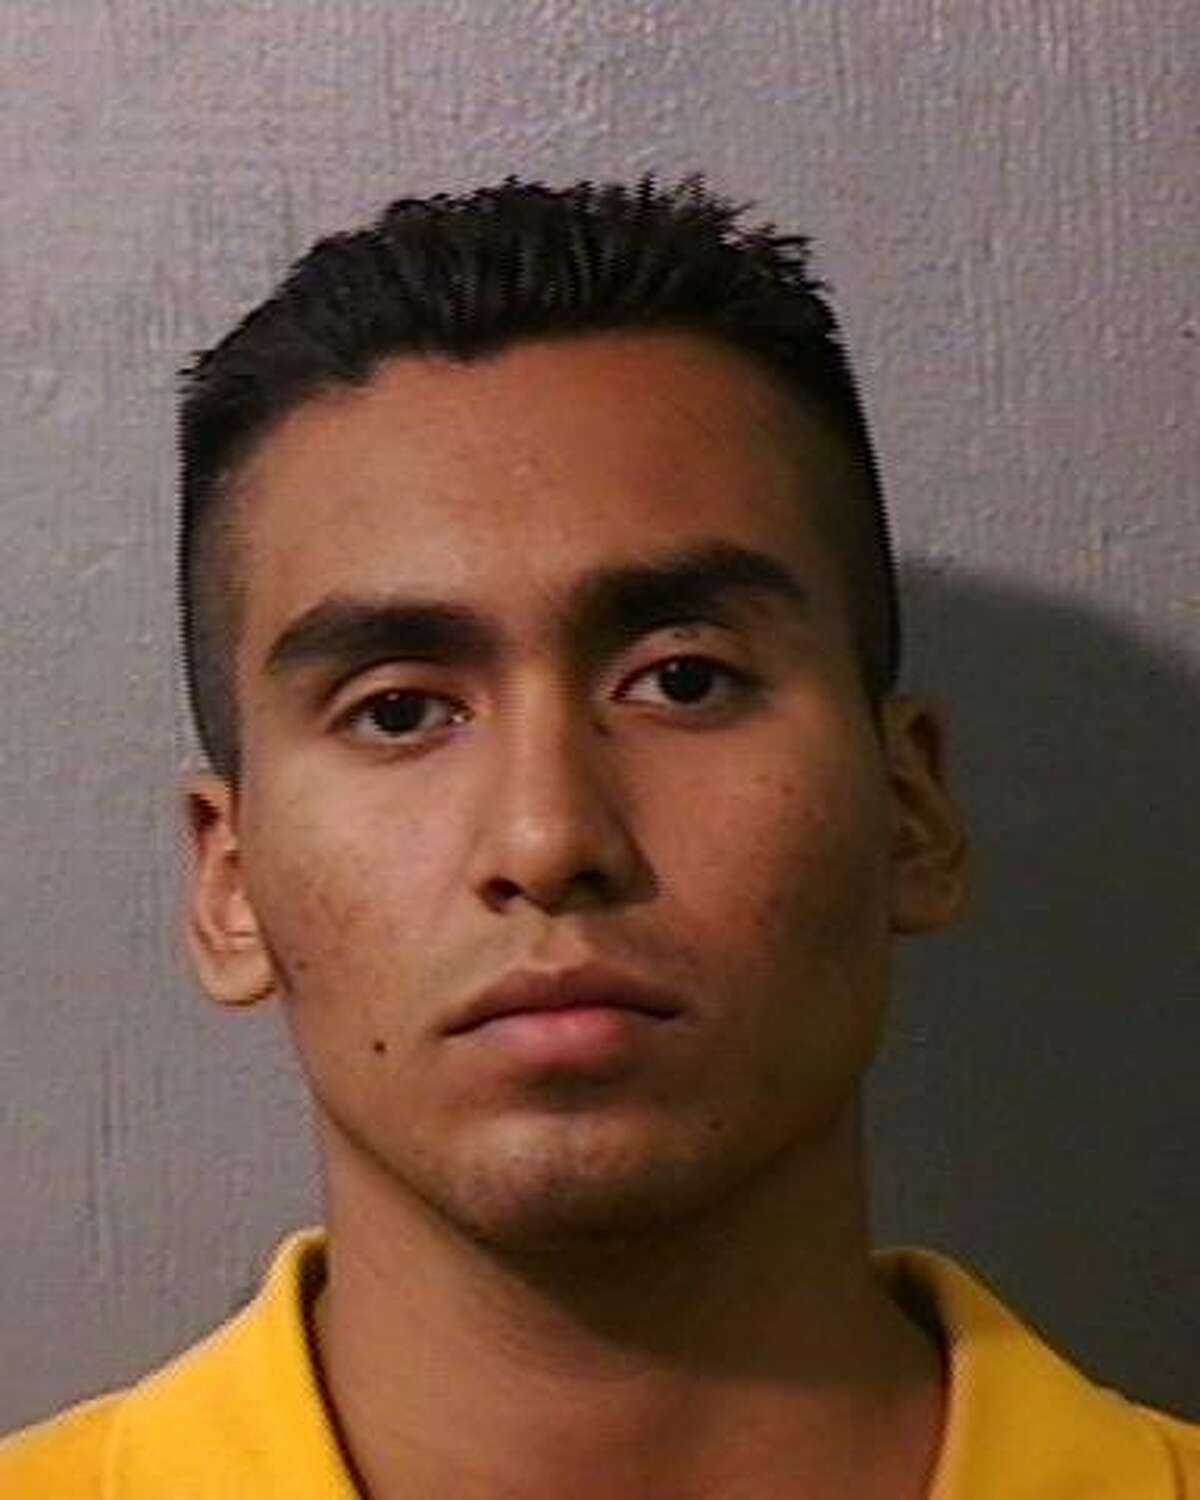 Juan Manuel Balderas was booked on a capital murder charge on Dec. 18, 2005. He has been in jail for 7 years, 8 months. Charges were filed against Efrain Lopez, Balderas and Israel Diaz in the shooting death of a man in the 1300 block of Bunker Hill about 9 p.m. in Dec. 2005. Read more at HoustonChronicle.com.